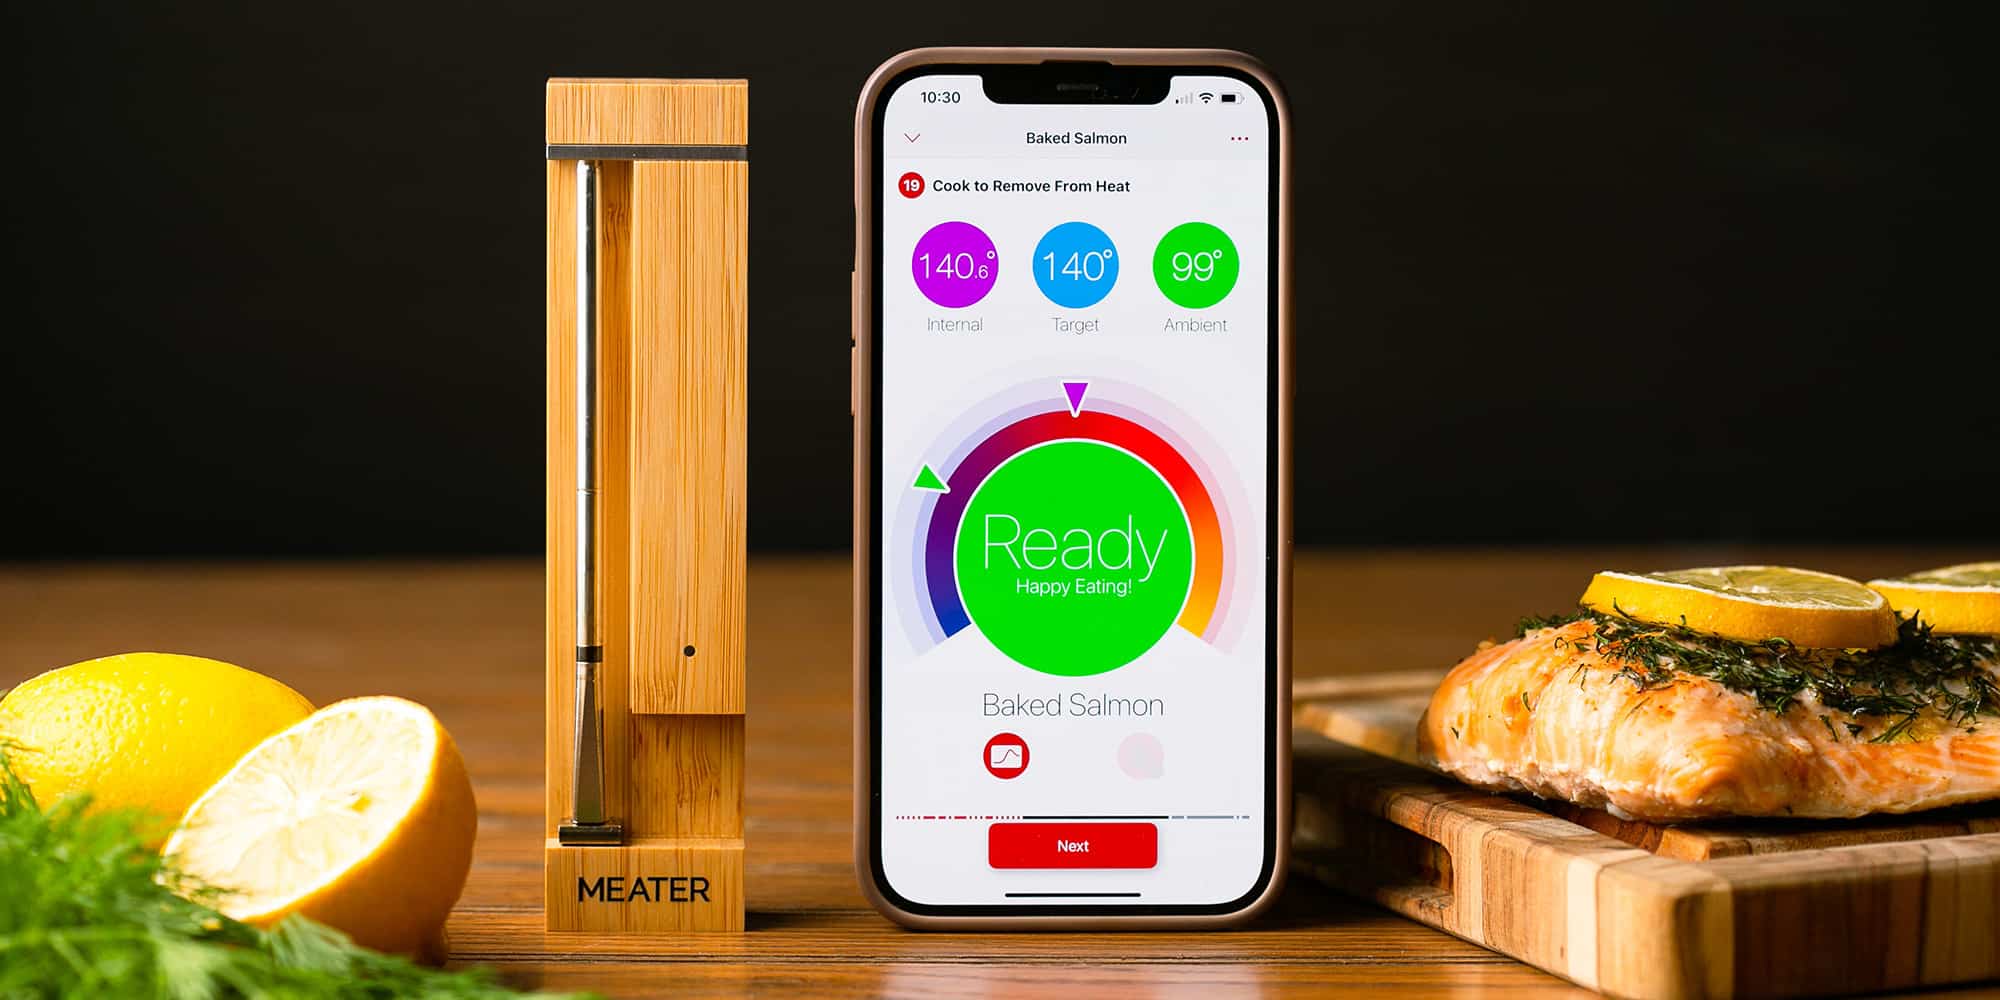 MEATER Plus Review: Worth the Price